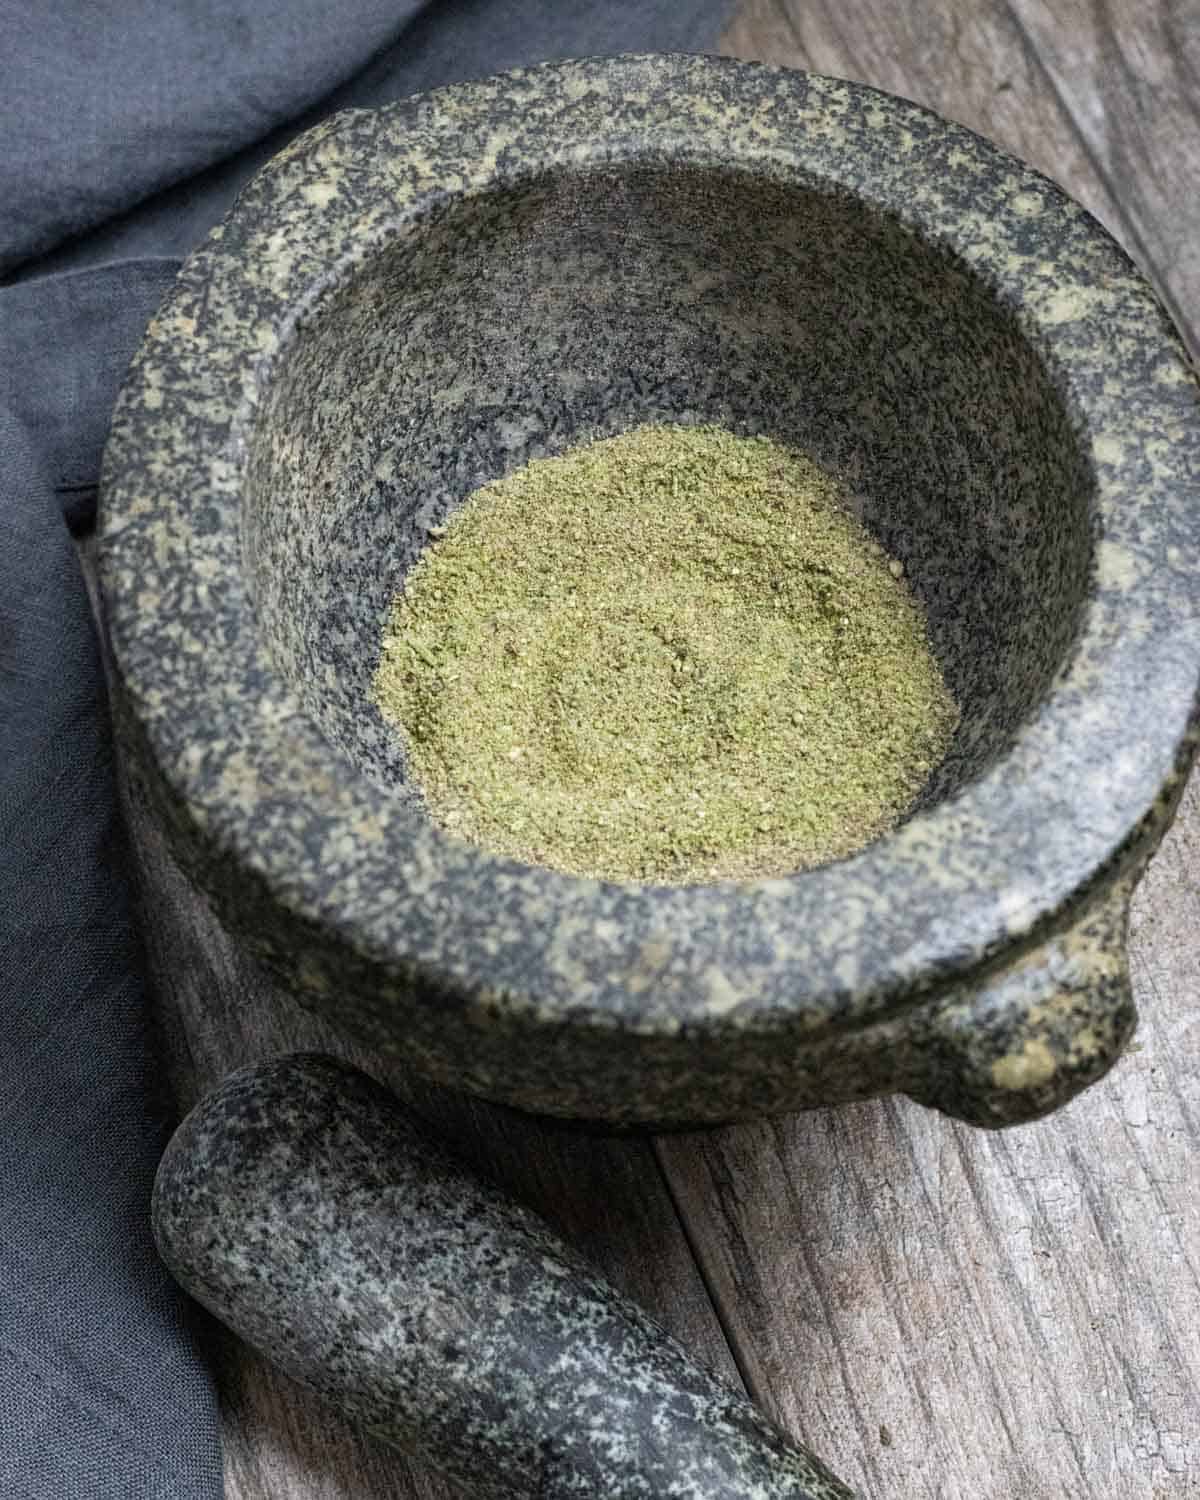 Finely ground seasoning in a granite mortar.